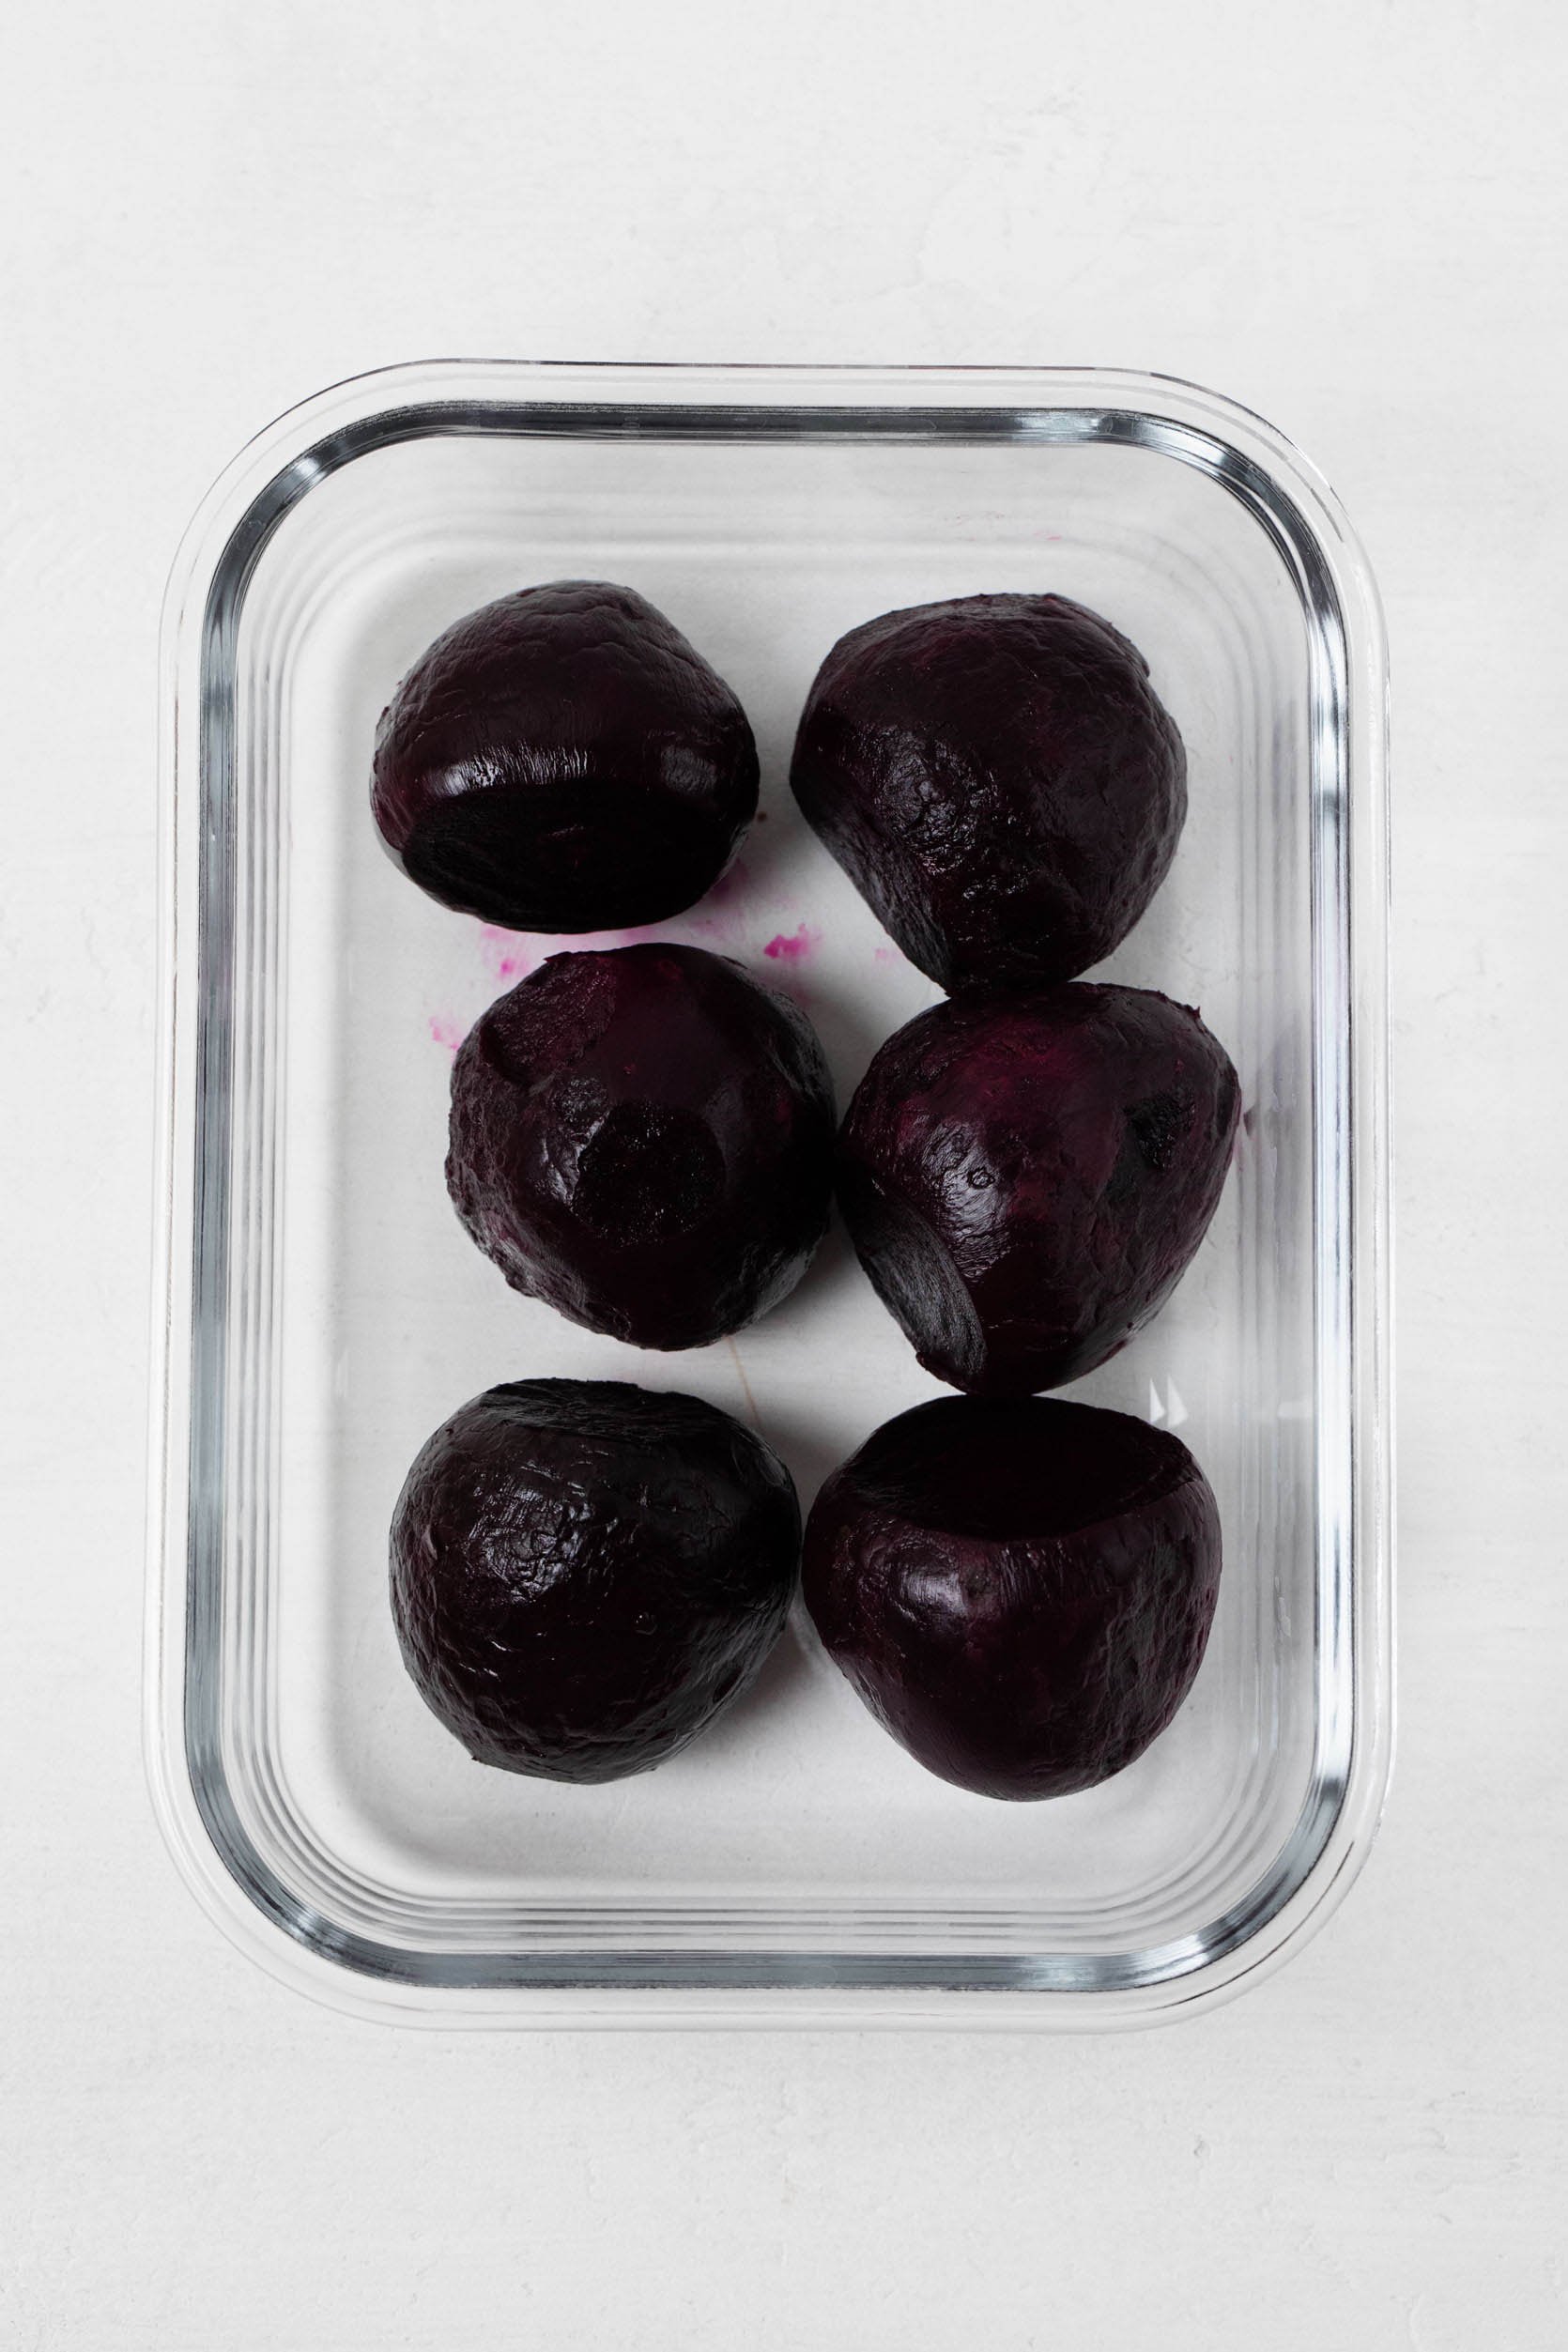 Red, roasted beets have been meal prepped are are held in a clear, glass storage container.